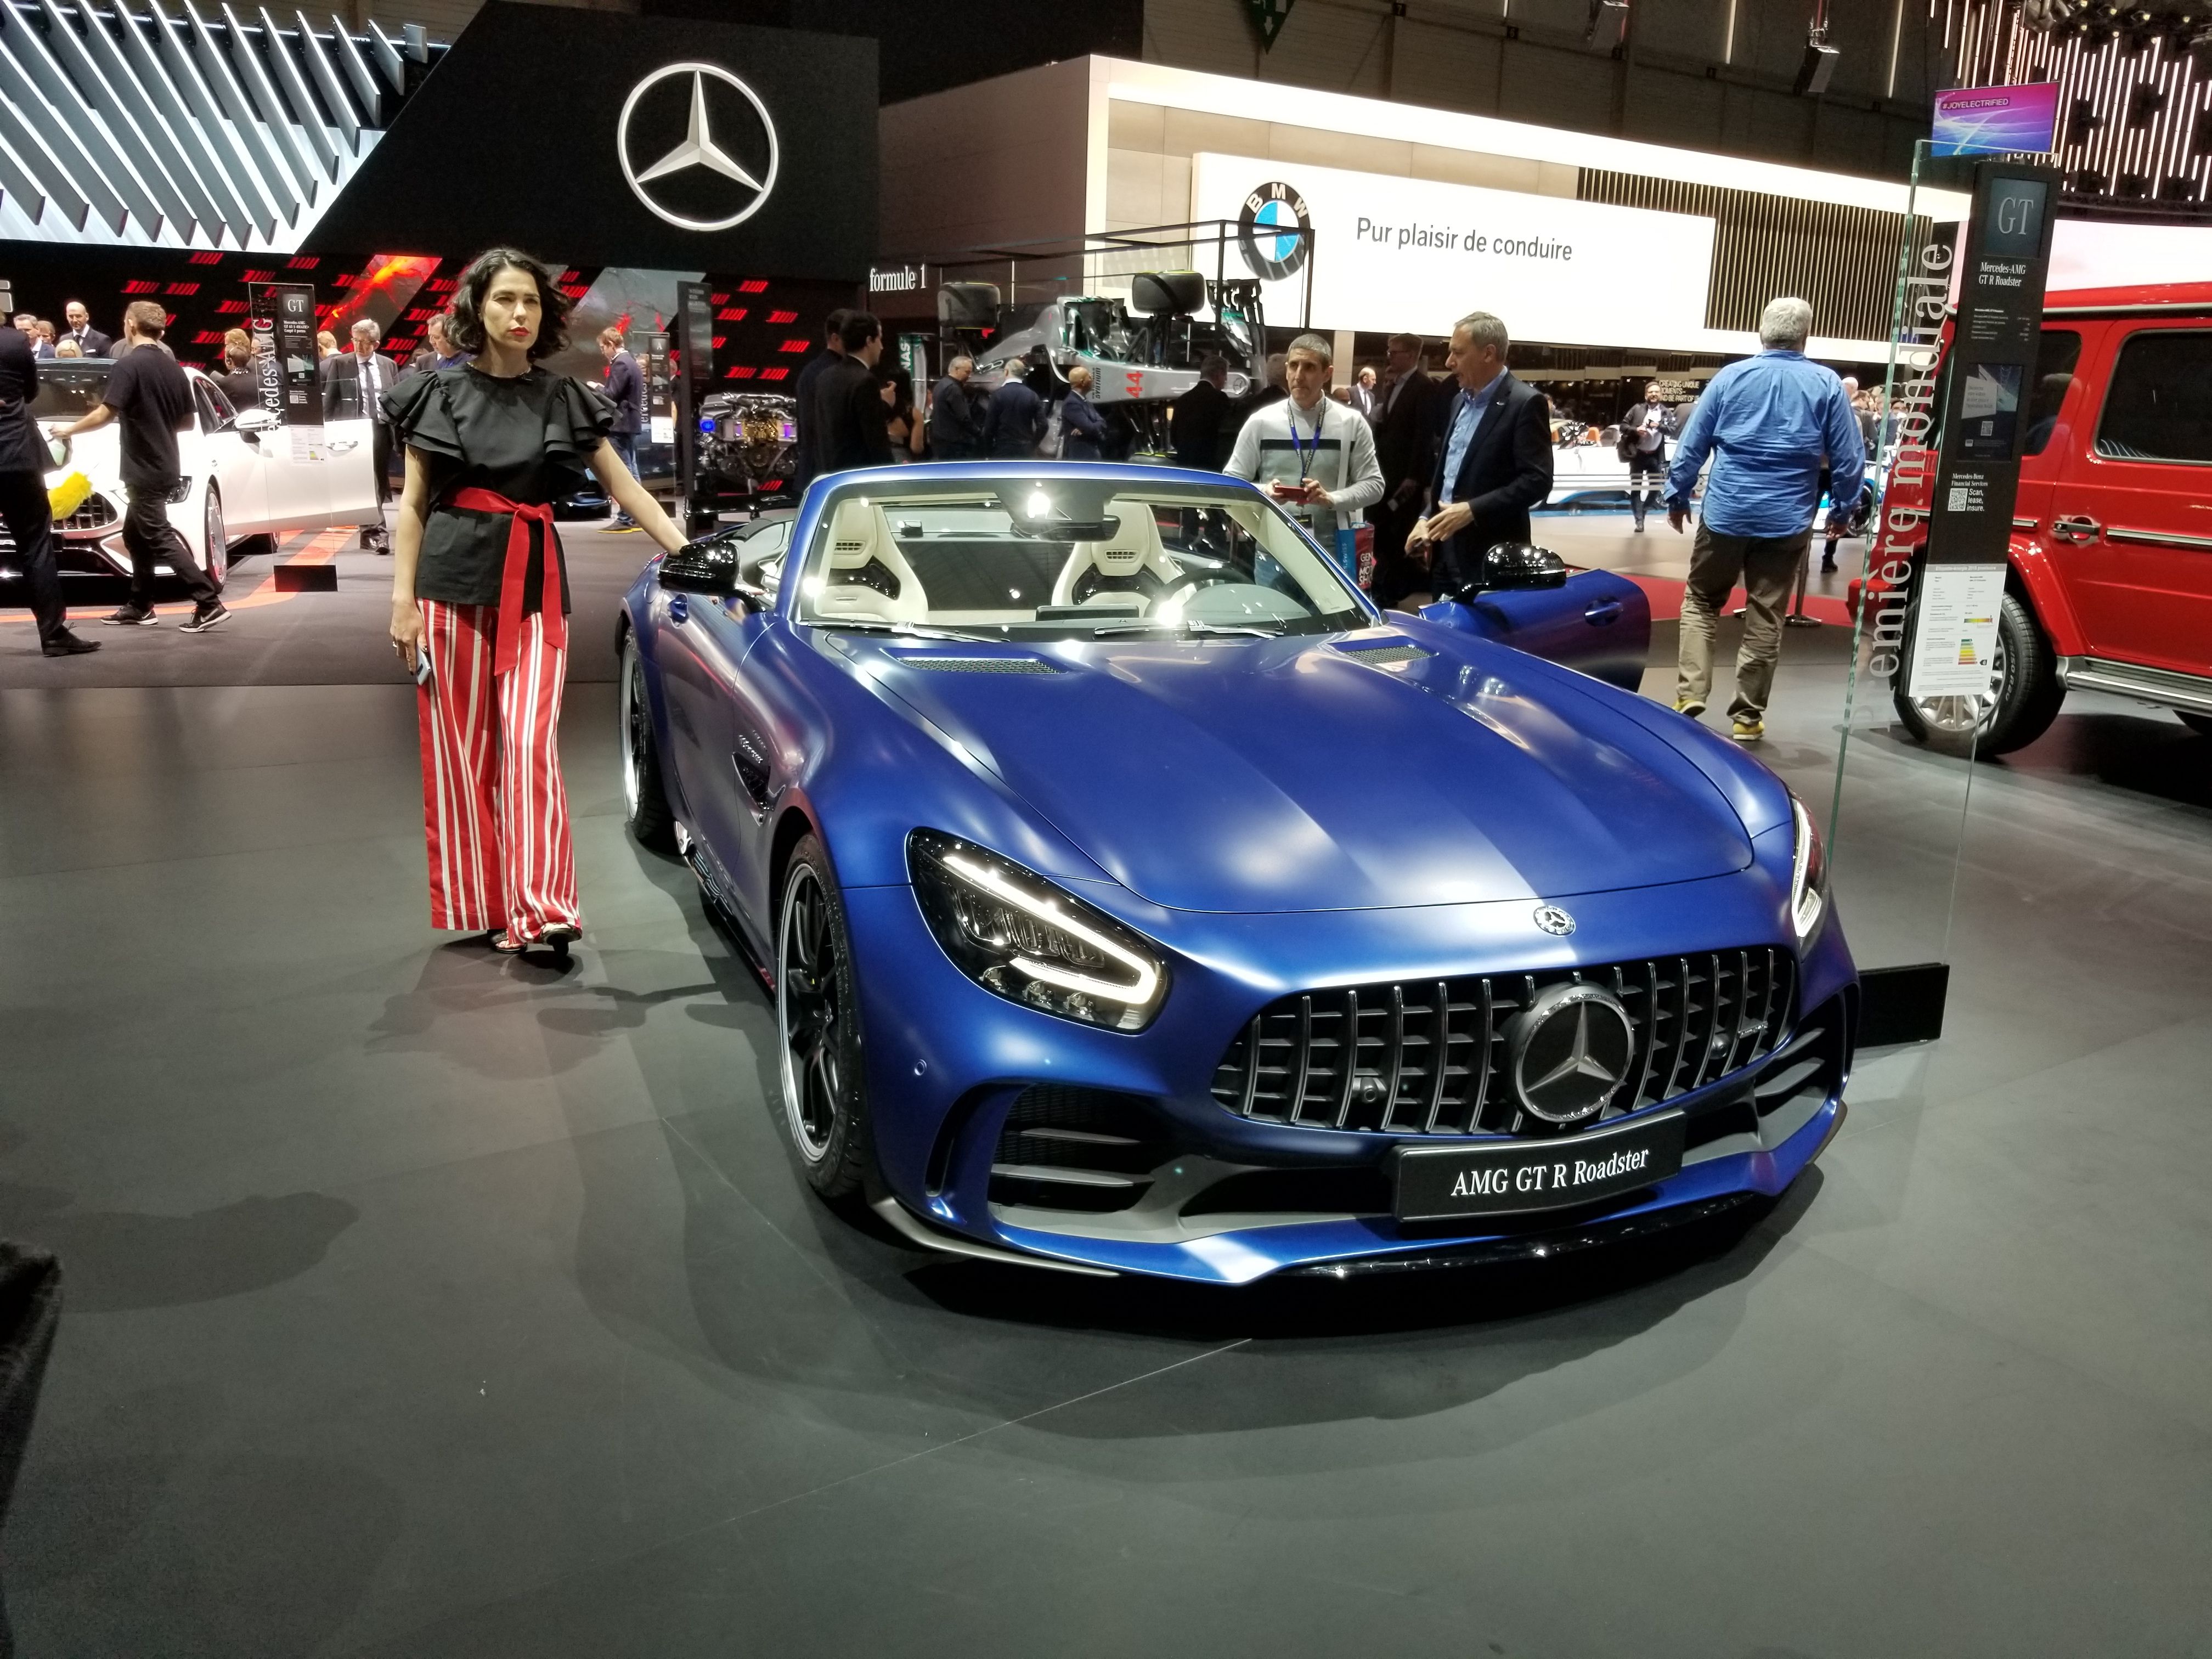 2019 Mercedes-AMG GT-R Roadster Has the Makings of a Future Collectible